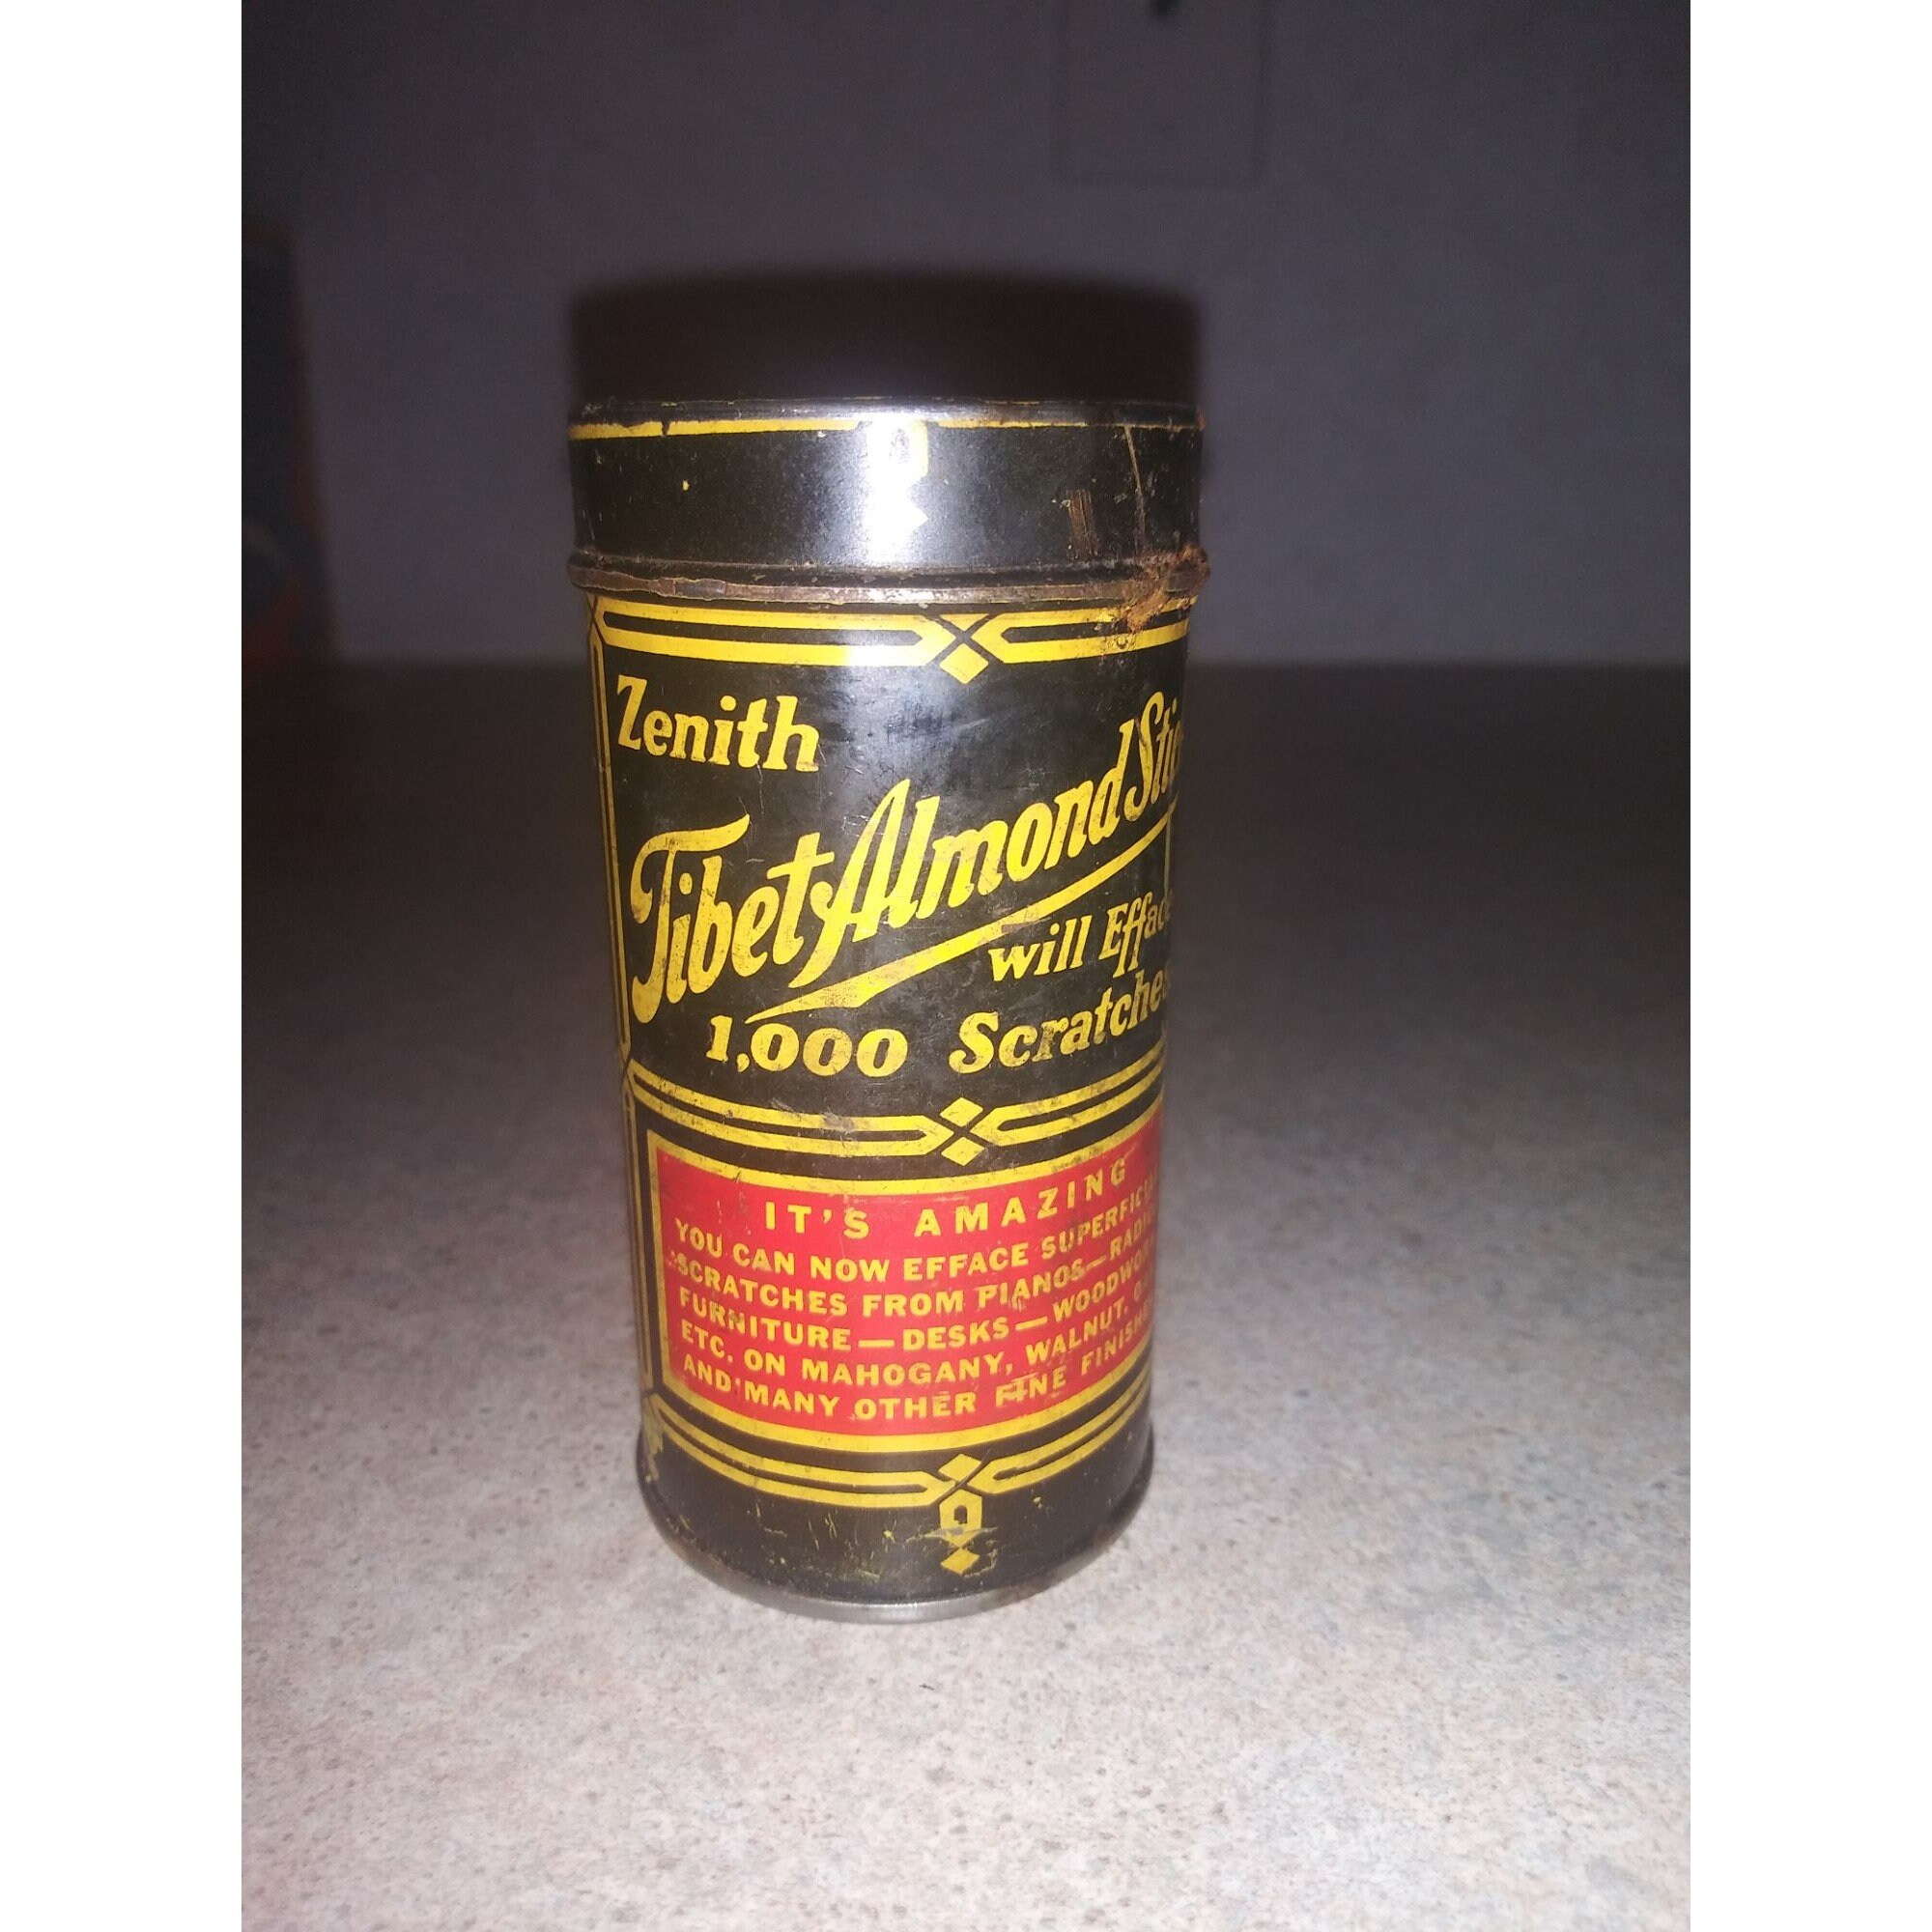 Review of the Zenith Tibet Almond Stick for Furniture Scratches - HubPages